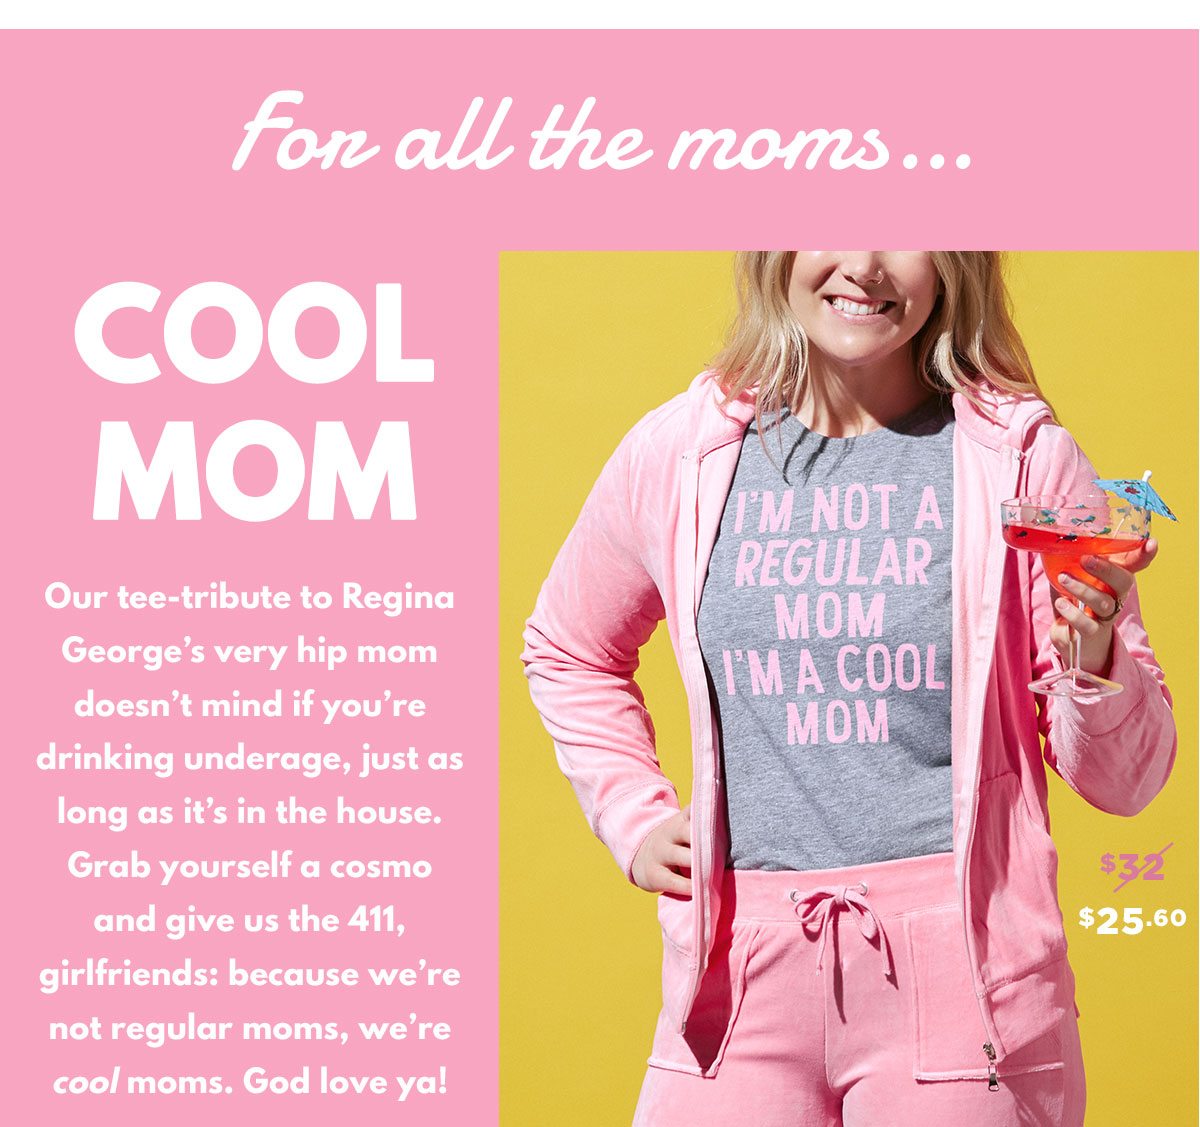 Our tee-tribute to Regina George’s very hip mom doesn’t mind if you’re drinking underage, just as long as it’s in the house. Grab yourself a cosmo and give us the 411, girlfriends: because we’re not regular moms, we’re cool moms. God love ya!